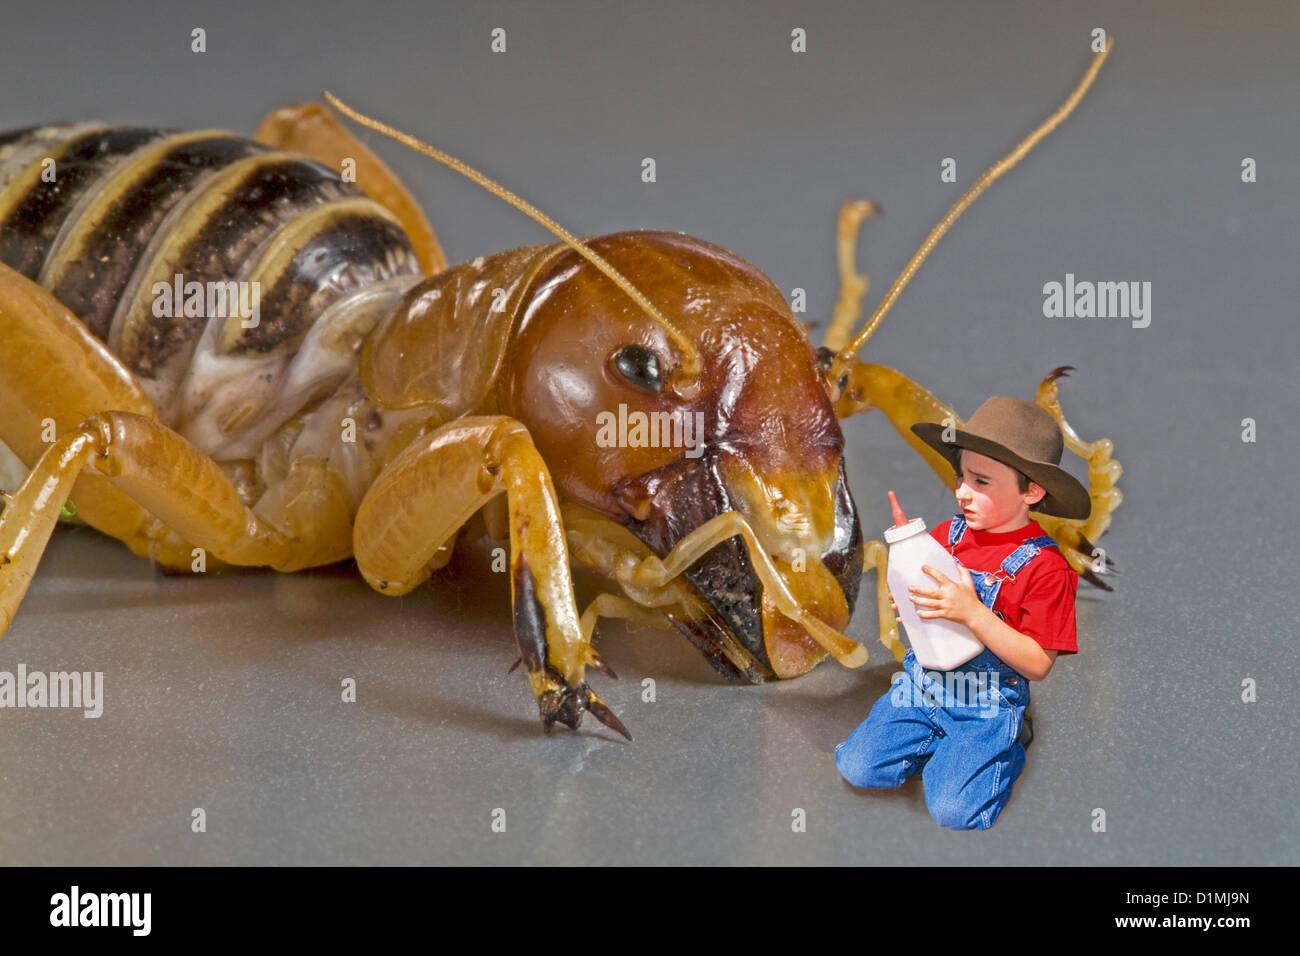 A young farm boy feeding a giant insect a bottle of milk. Stock Photo